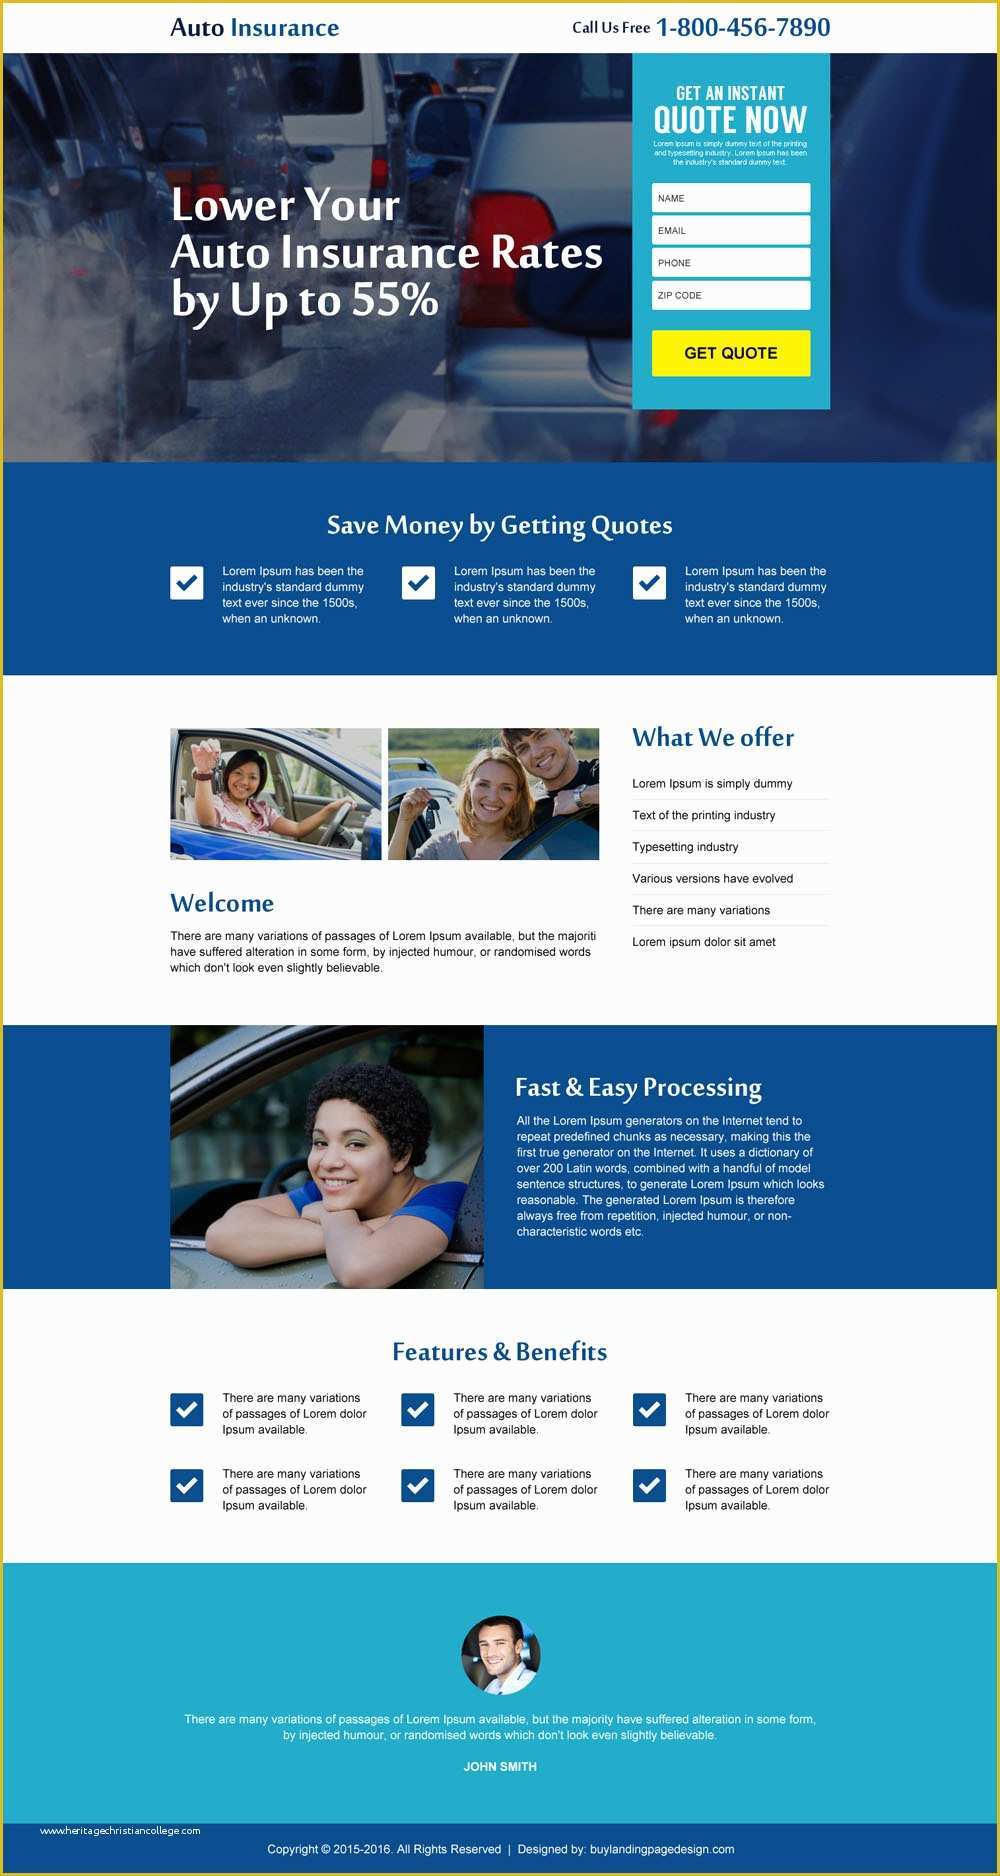 Free Lead Capture Page Templates Of Best Landing Pages to Capture Auto Insurance Leads and